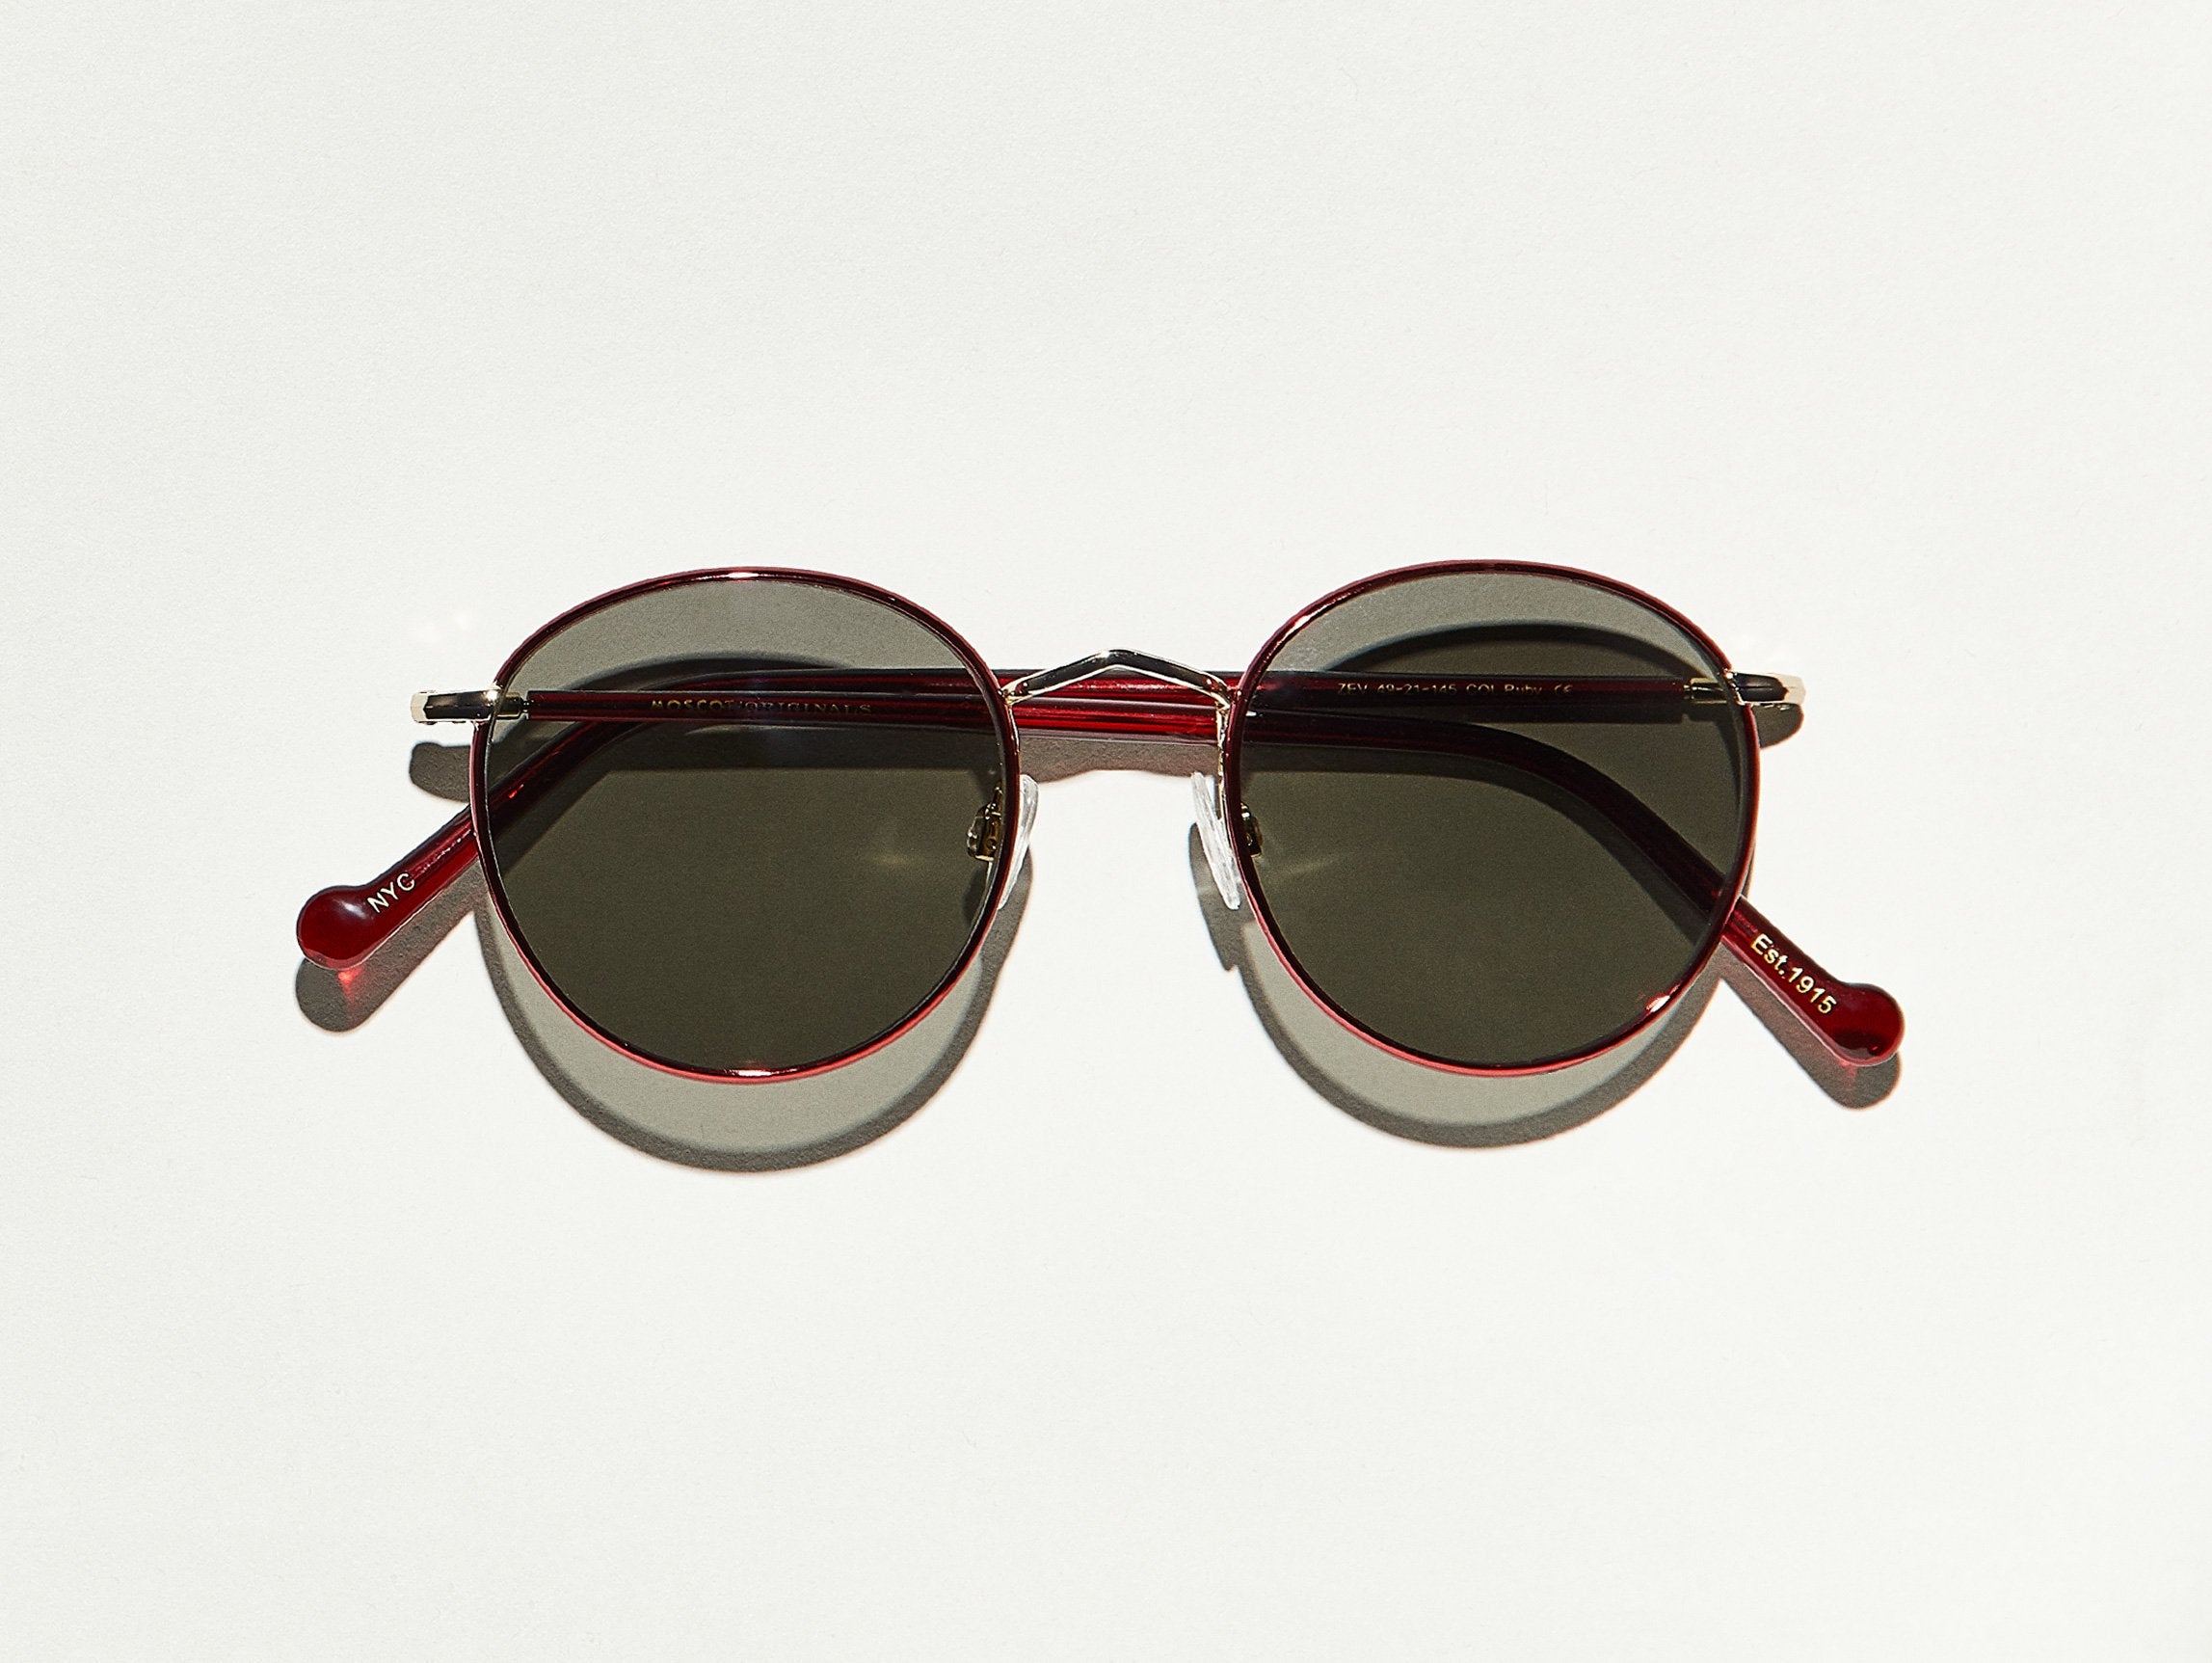 The ZEV SUN in Ruby/Gold with Grey Polarized Glass Lenses